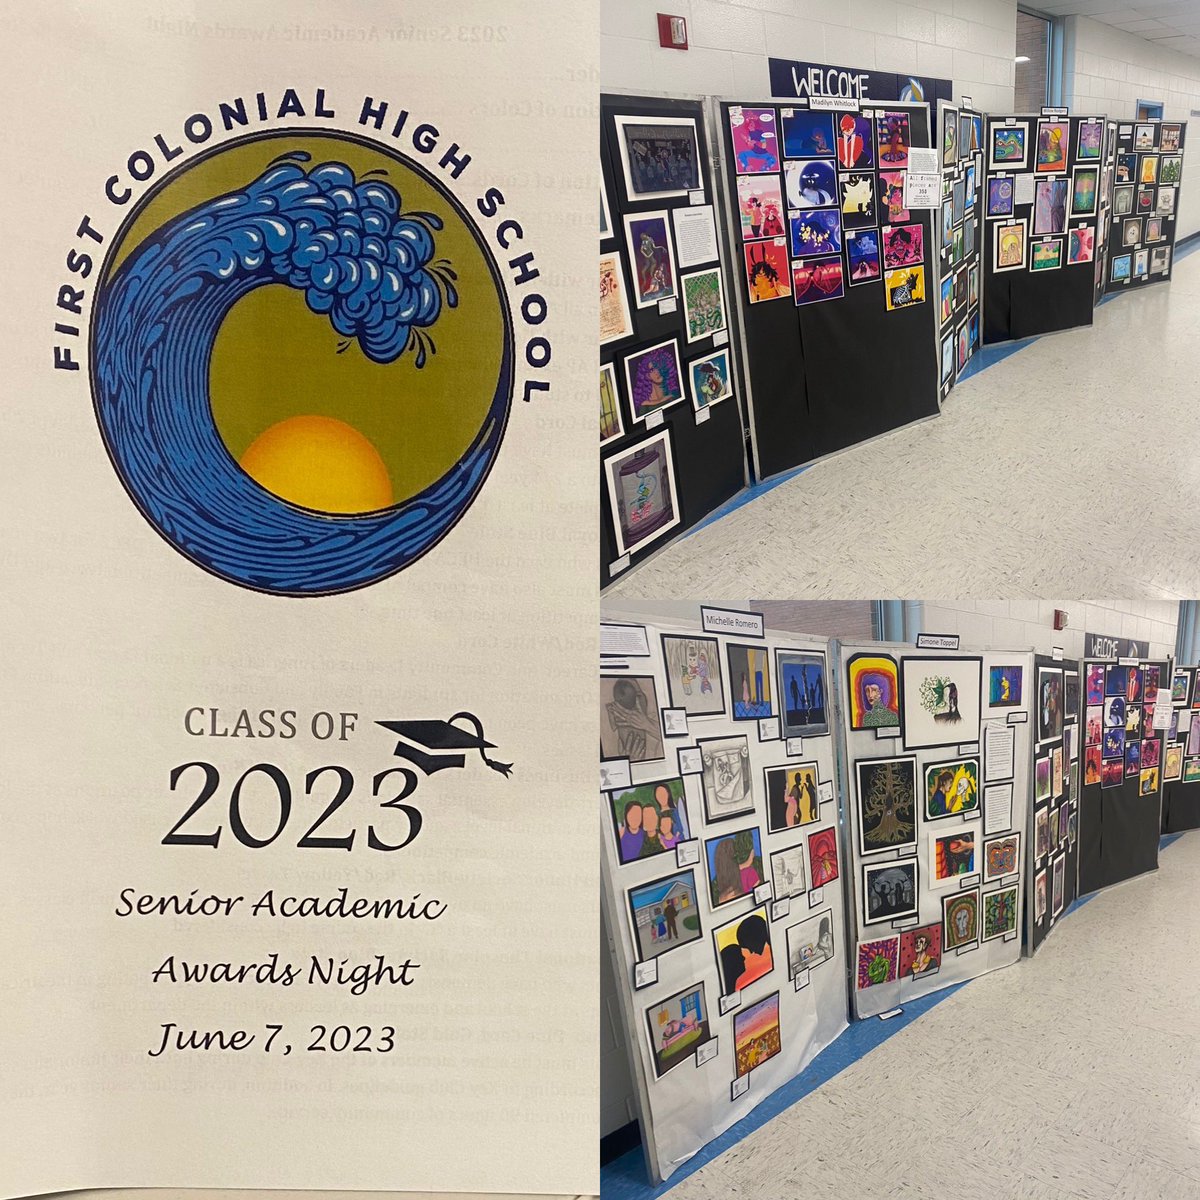 A great night for @FirstColonialHS art students and seniors. The annual visual arts show followed by Senior Academic Awards Night! #PatriotPride #WeRFC